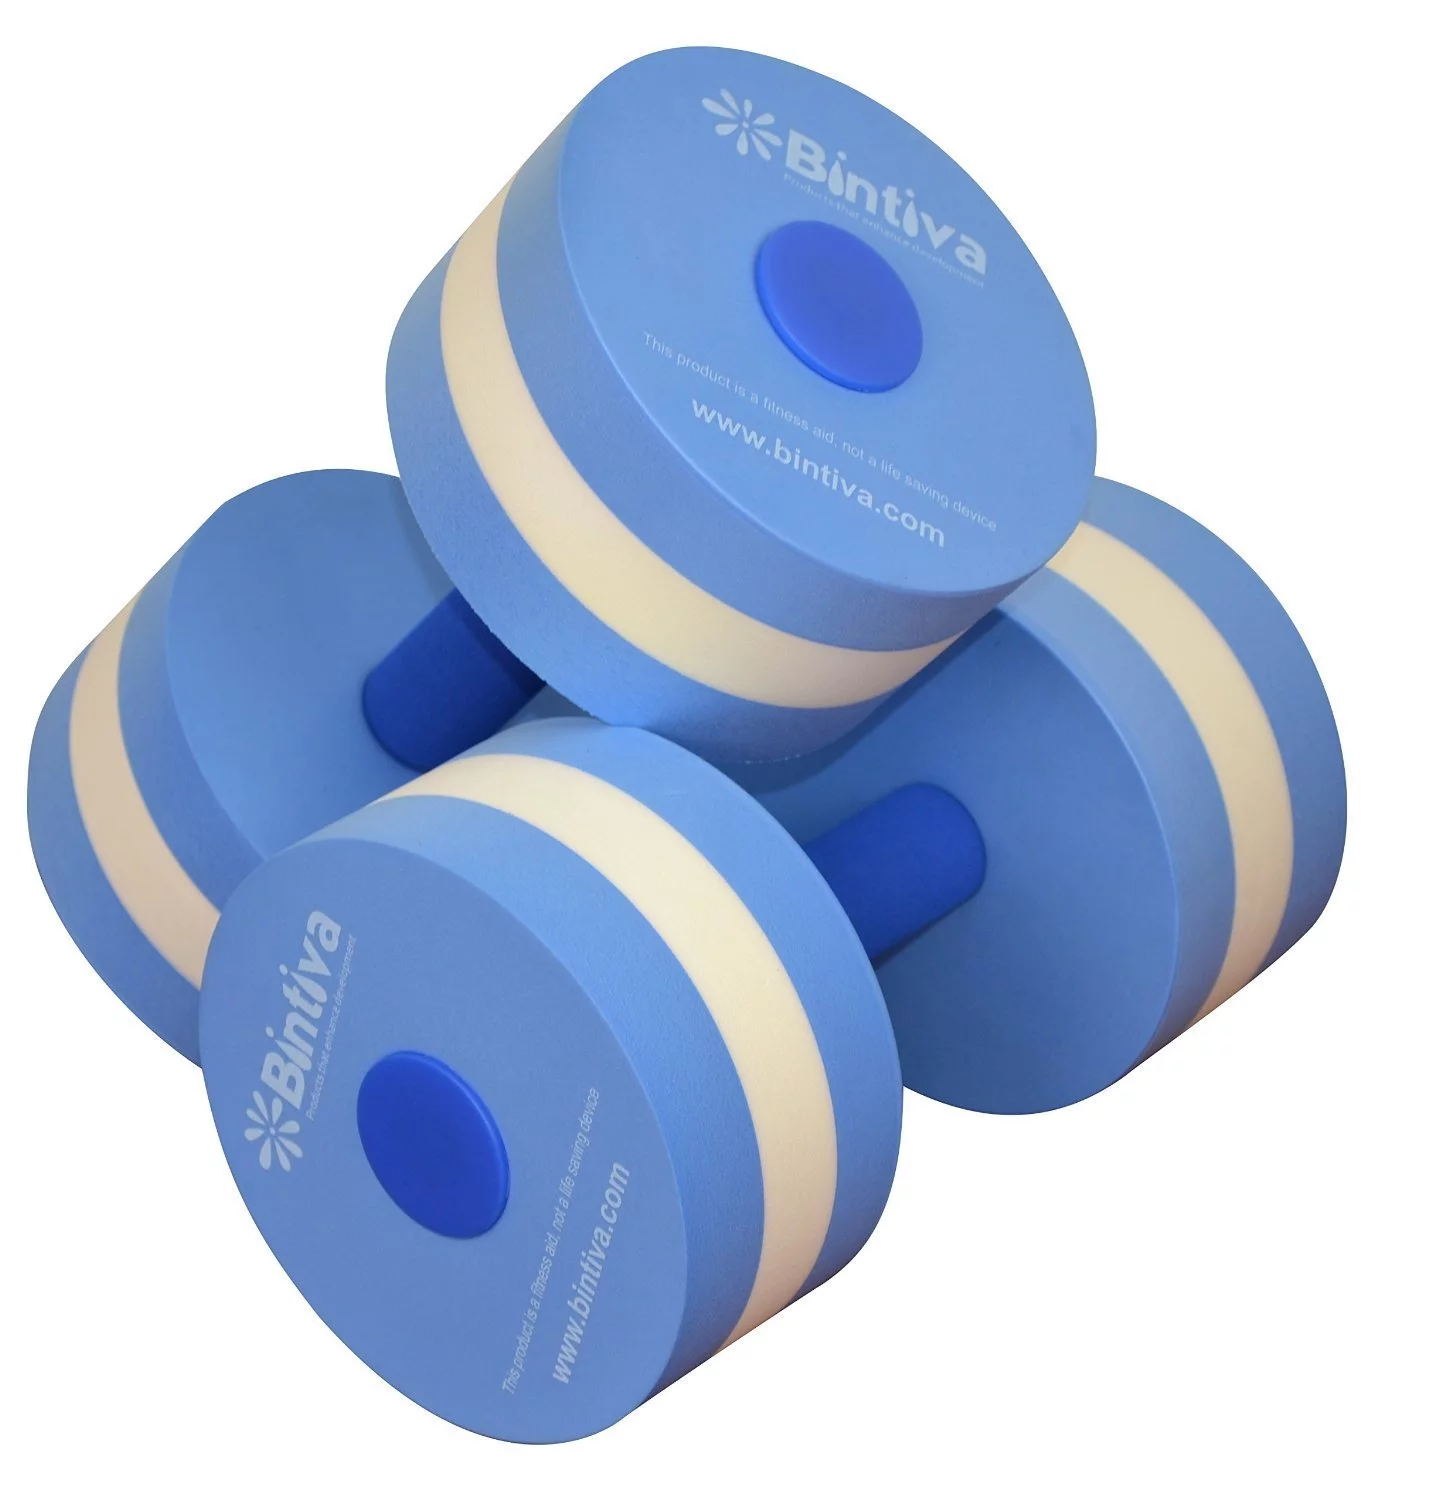 Aqua Dumbbell Set - Provides Resistance For Water Aerobics Fitness and Pool Exercises - 1 Pair - 3 Sizes Available - Small